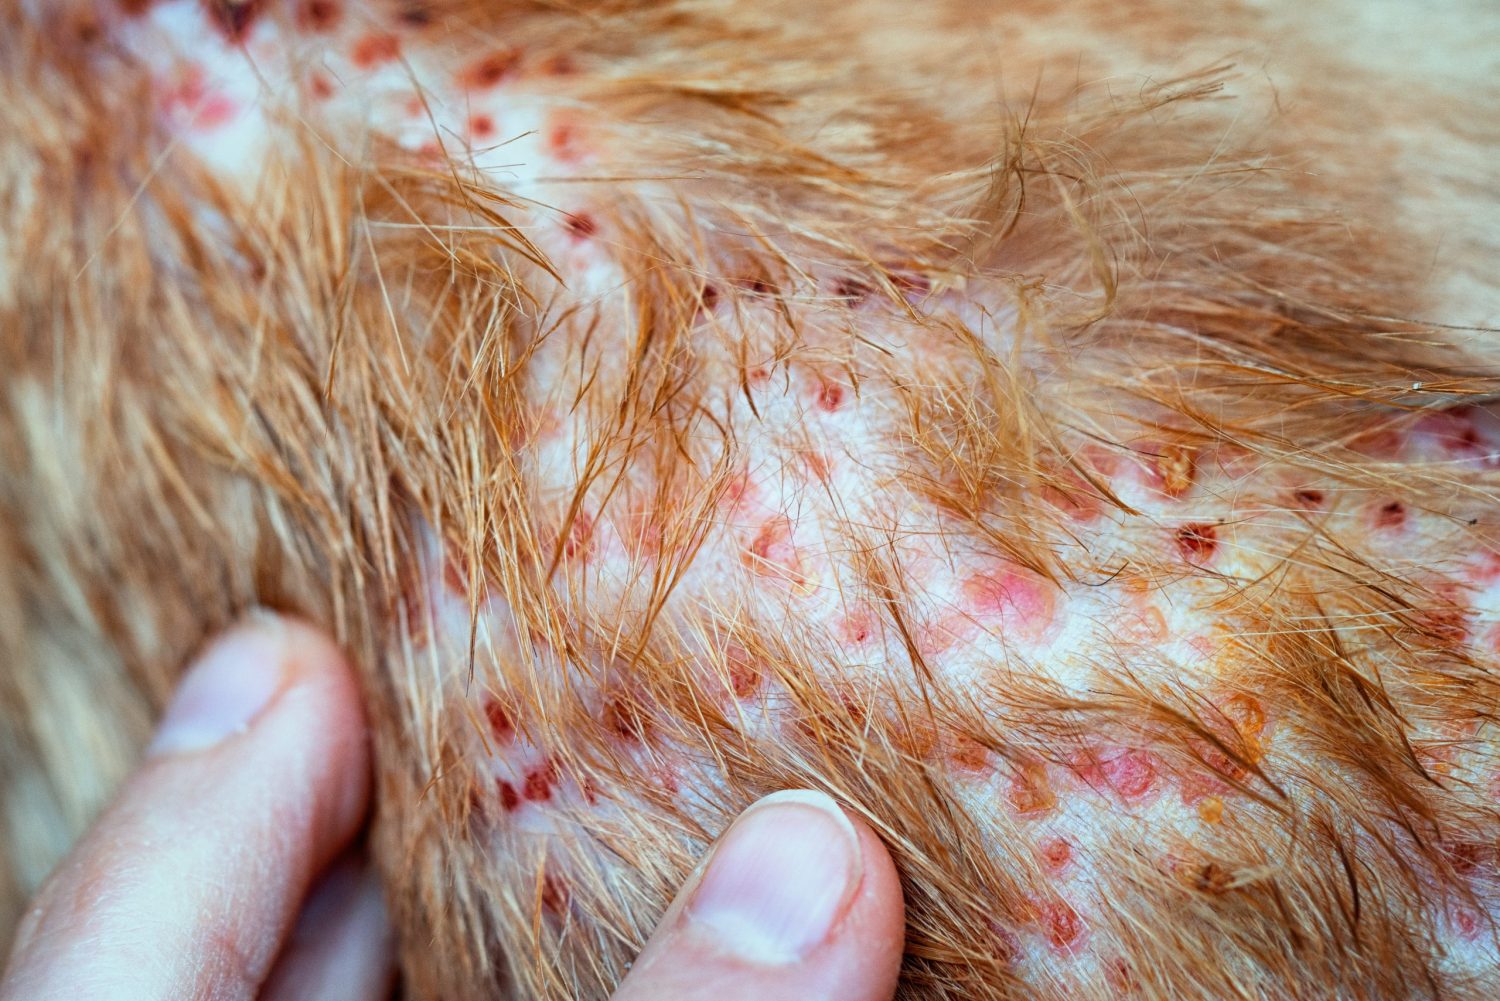 Common Skin Disorders in Dogs